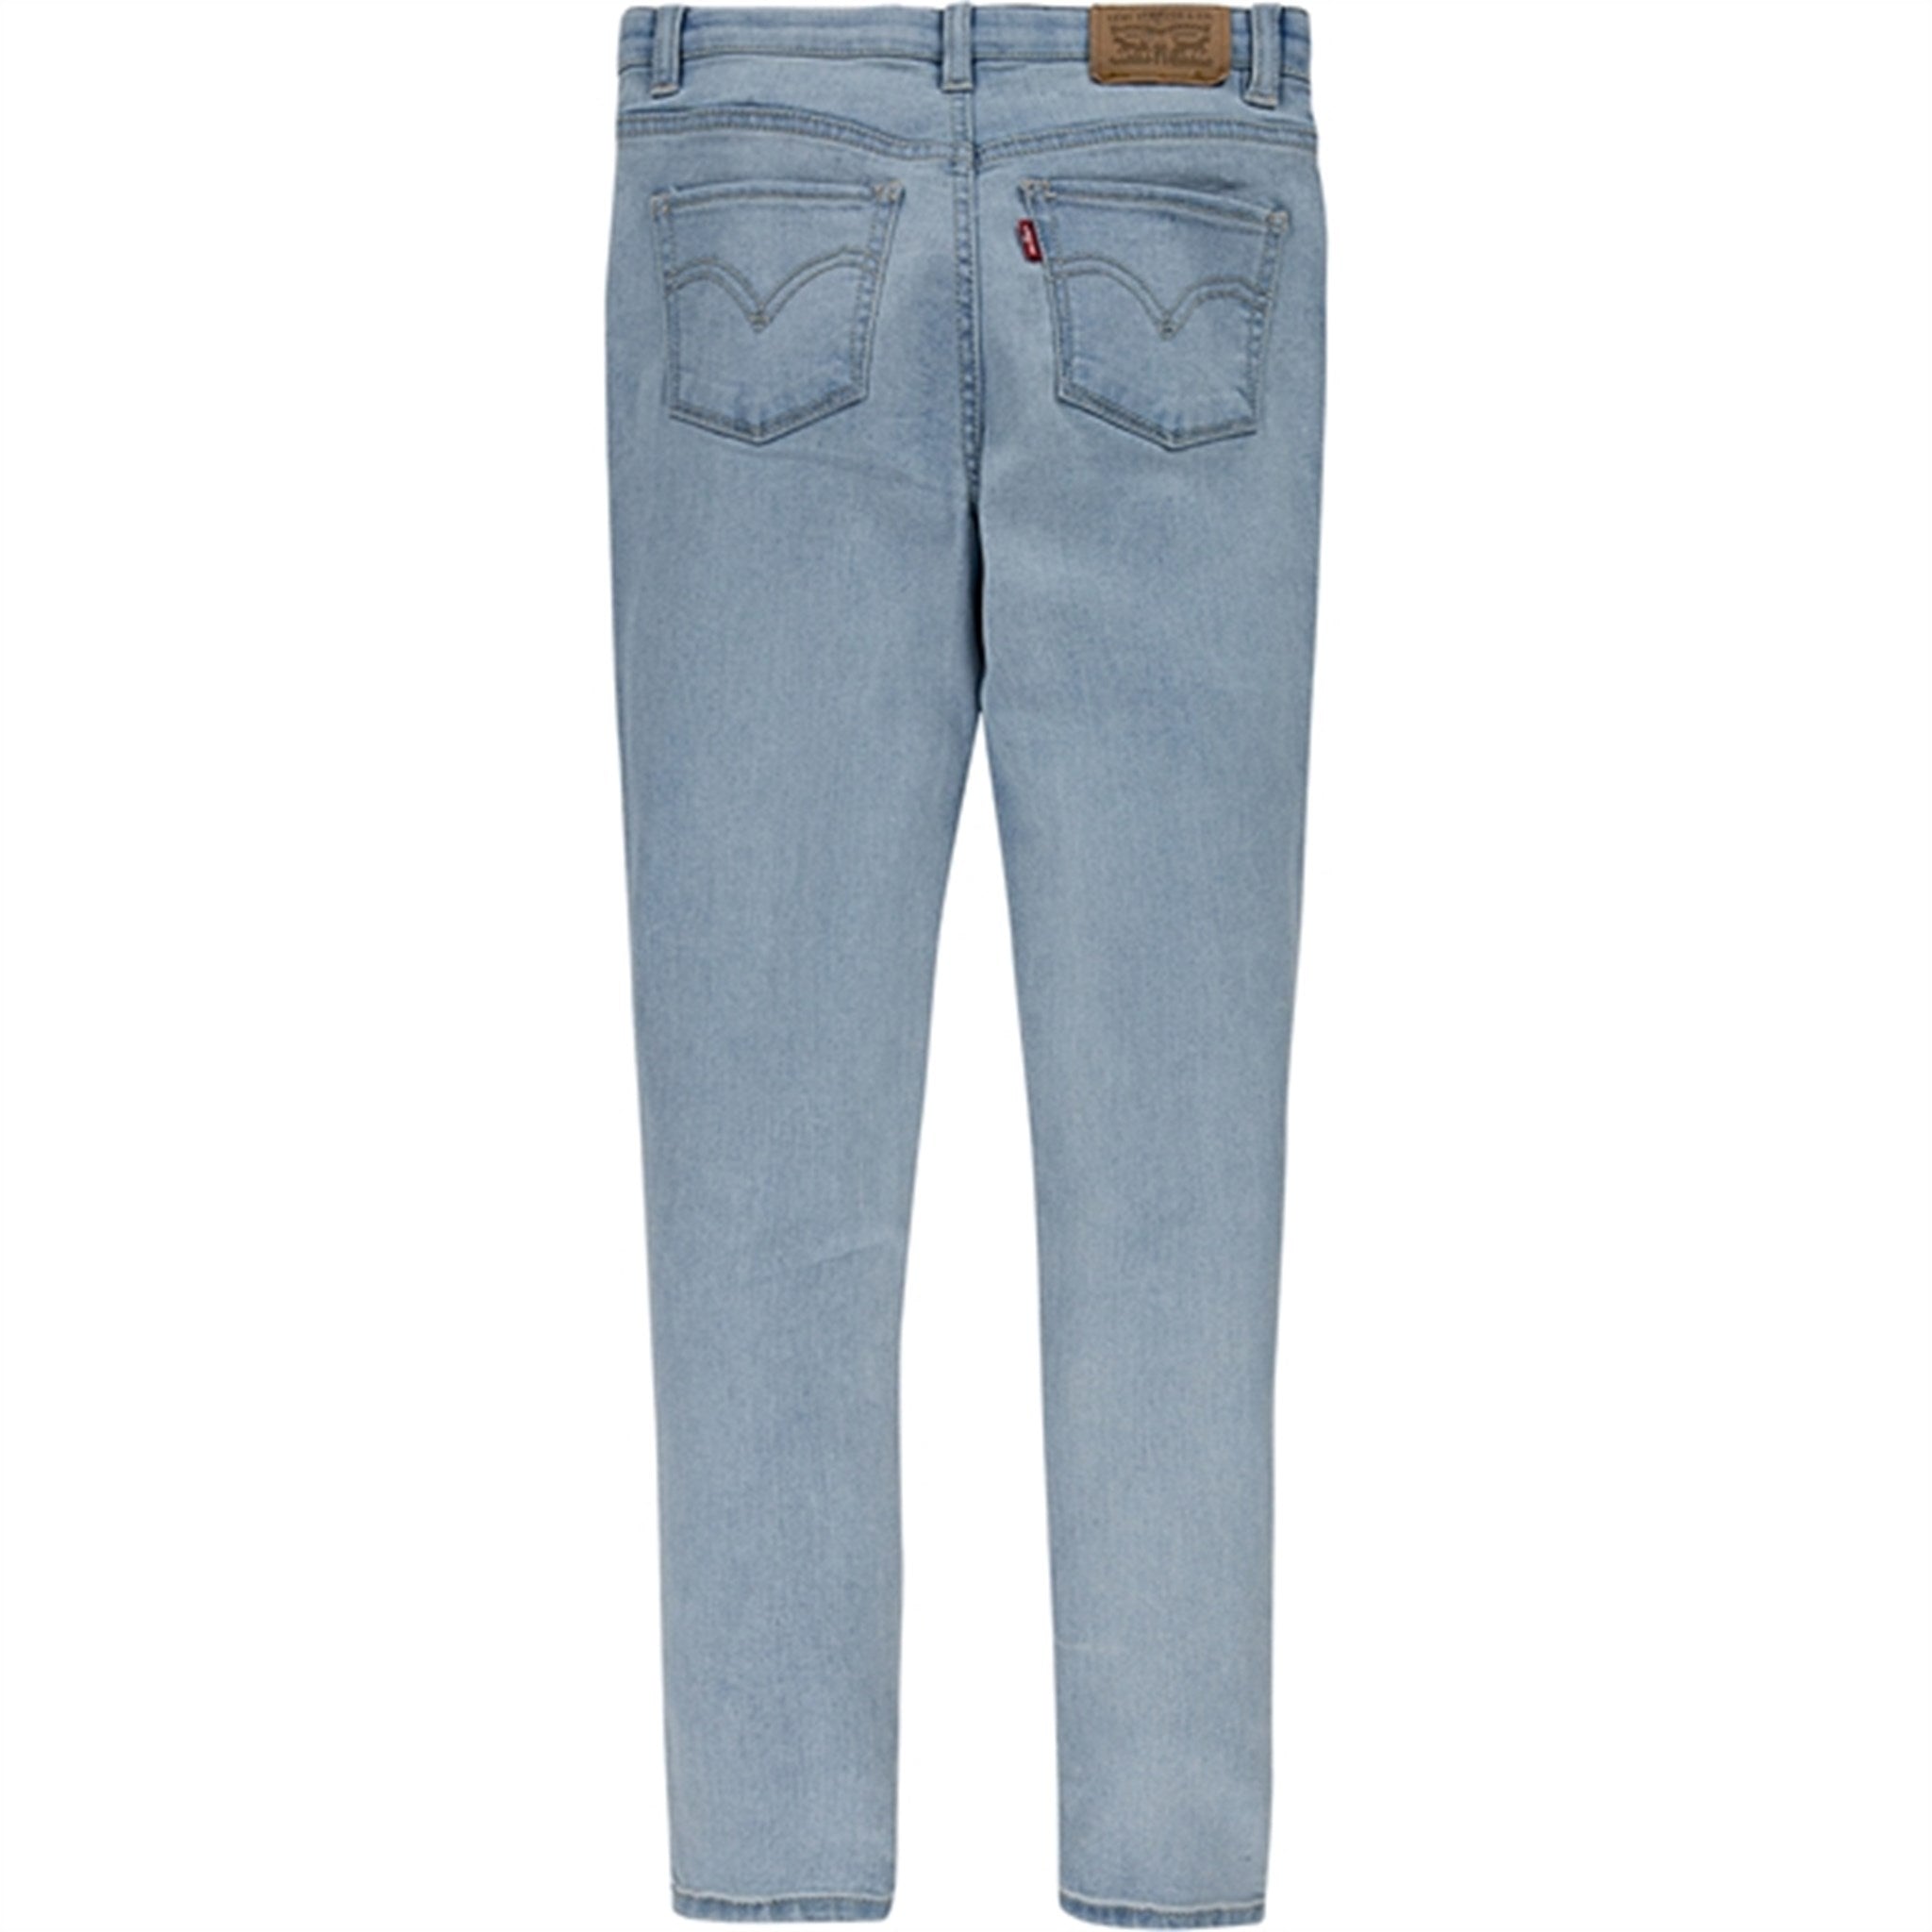 Levi's High Rise Super Skinny Jeans French Prince